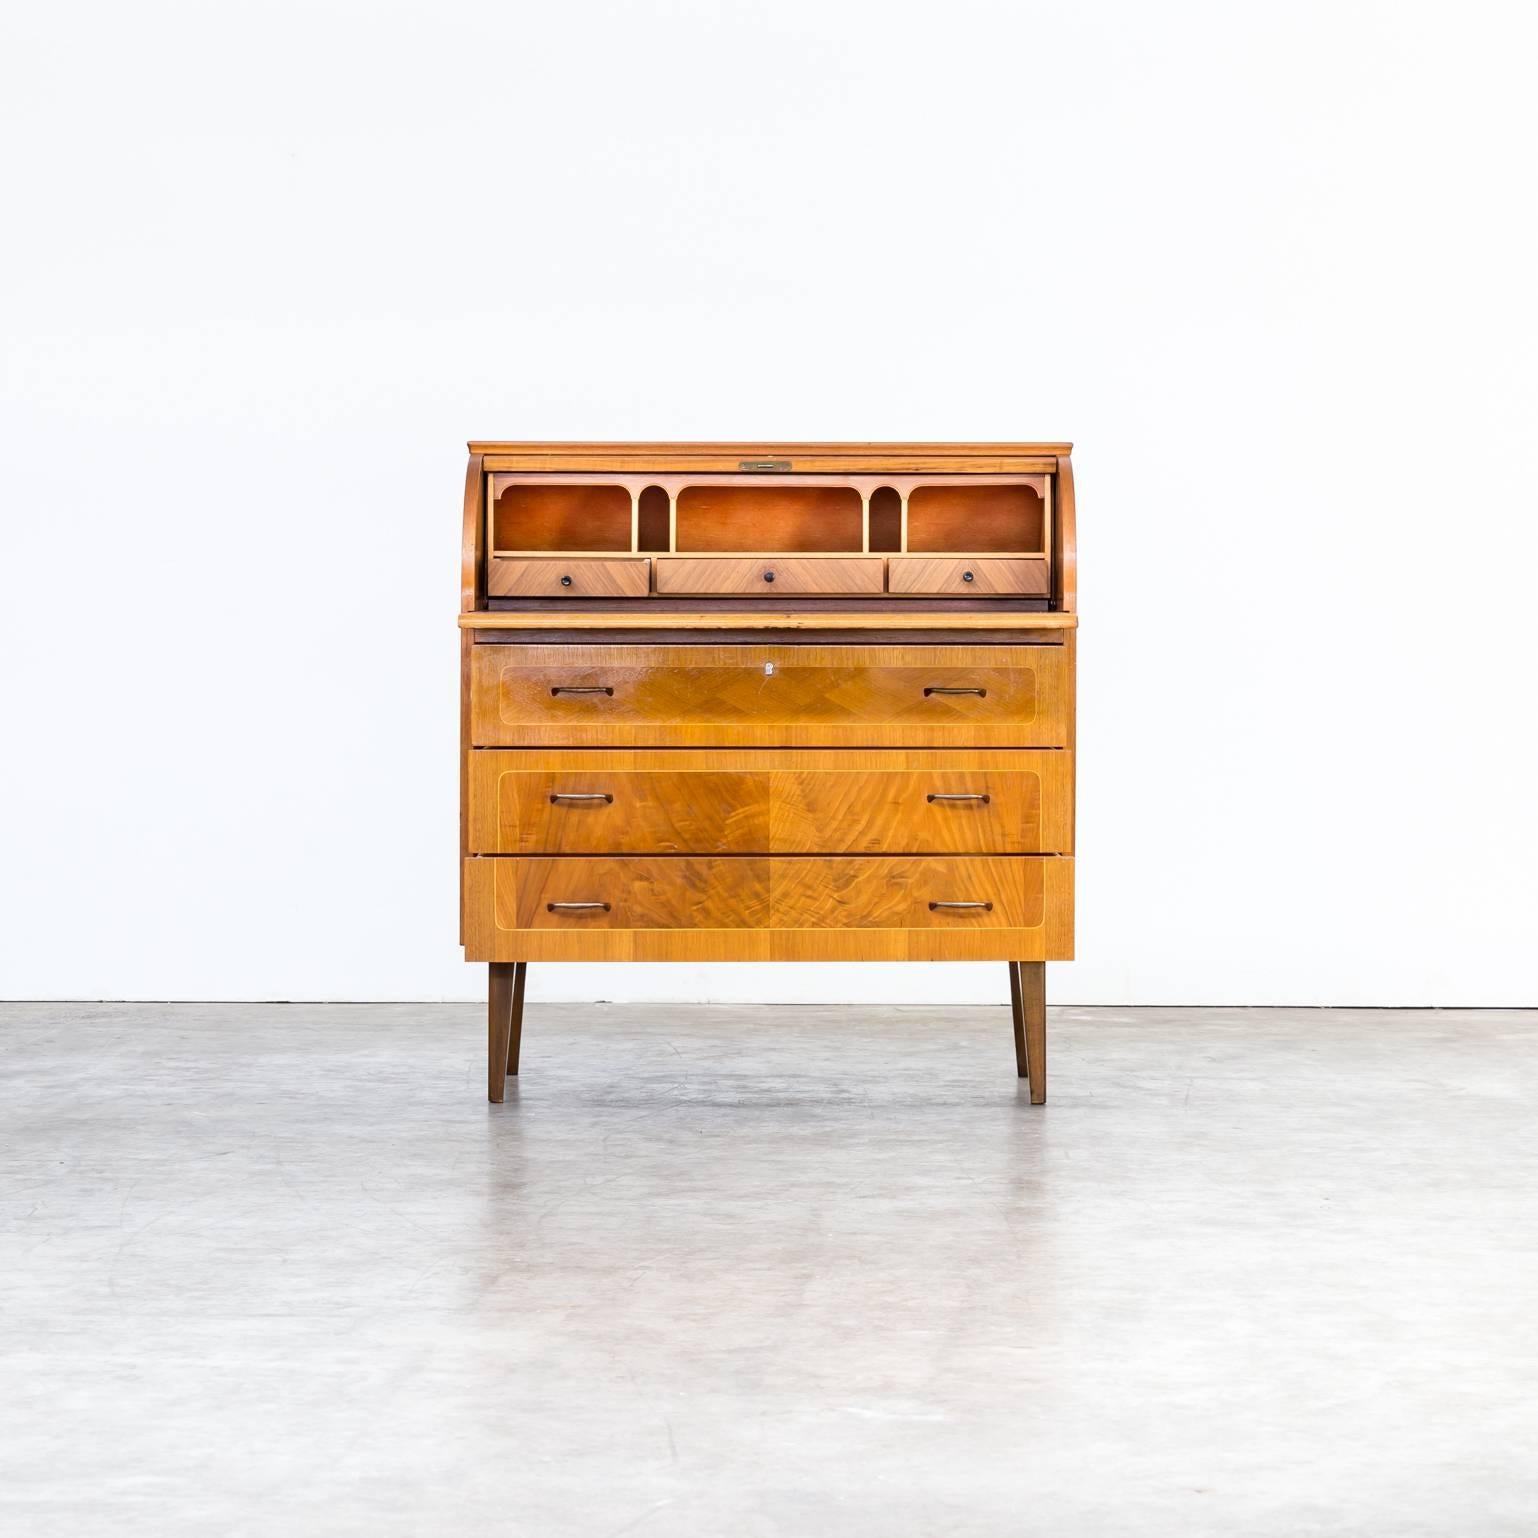 Midcentury Egon Ostergaard cylinder rolltop secretary desk. Good condition, wear consistent with age and use.